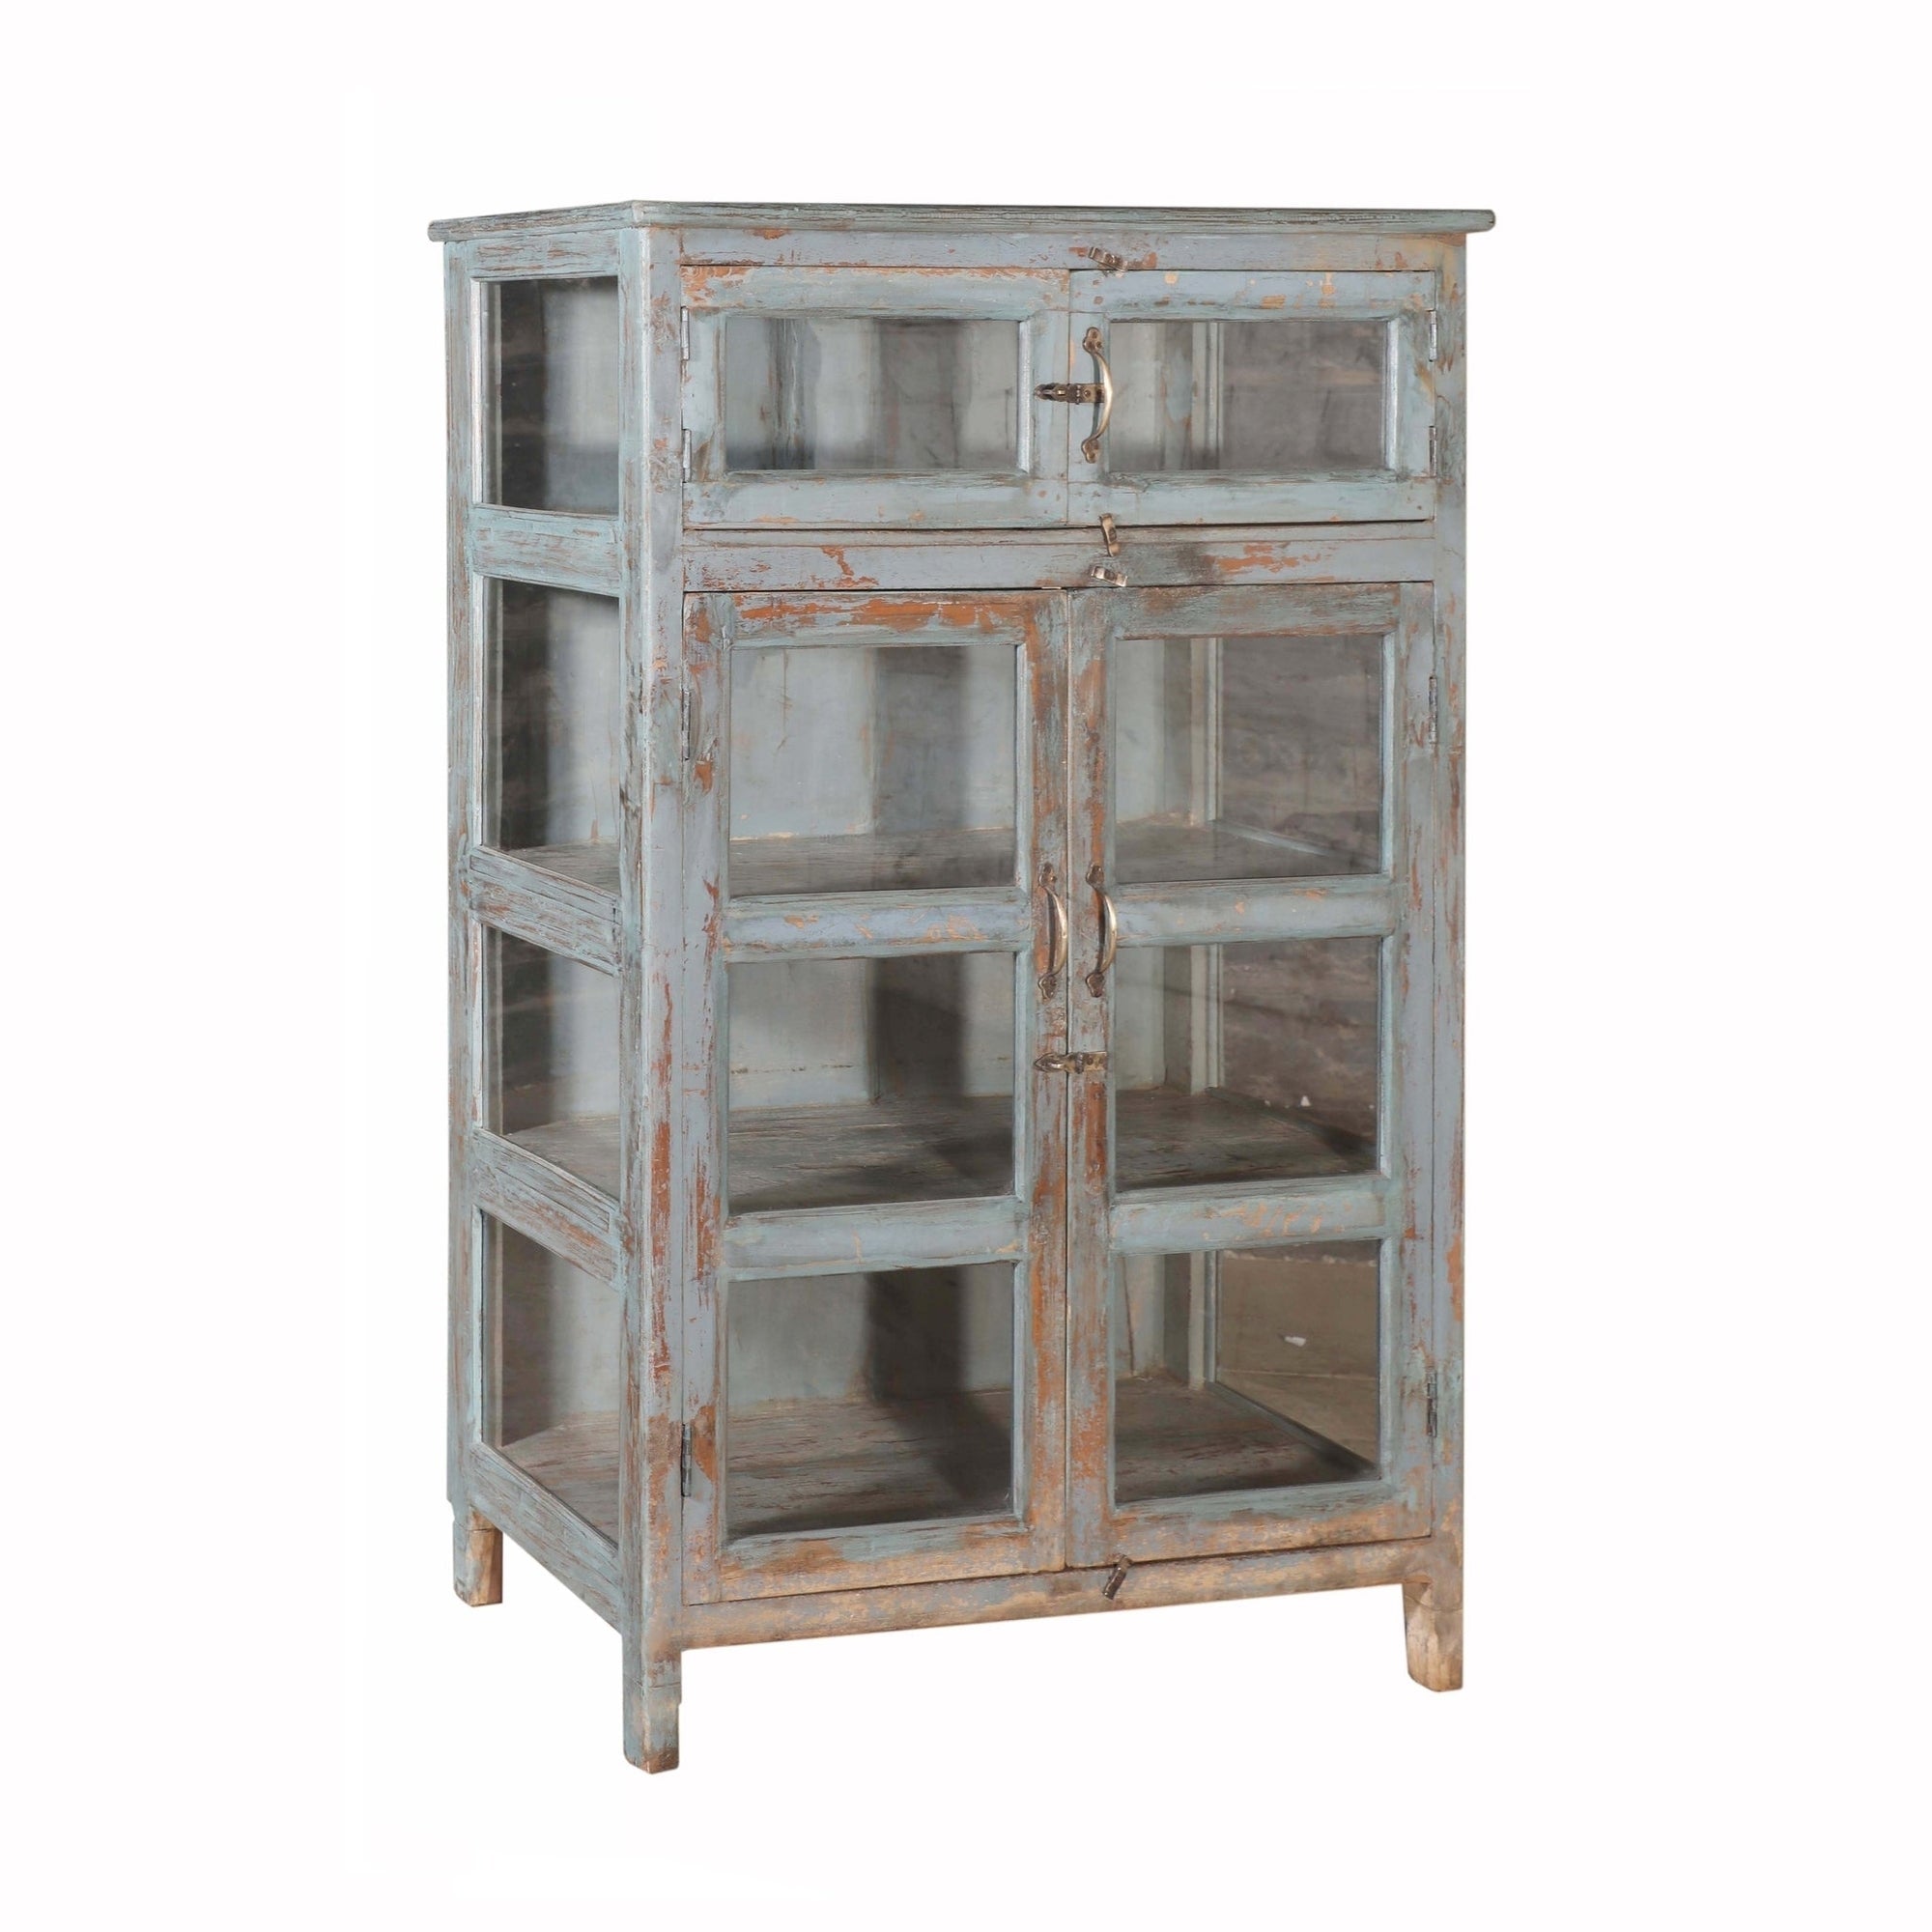 RM-059197, Wooden Cabinet With Glass, Teak, 50+Yrs Old - iDekor8